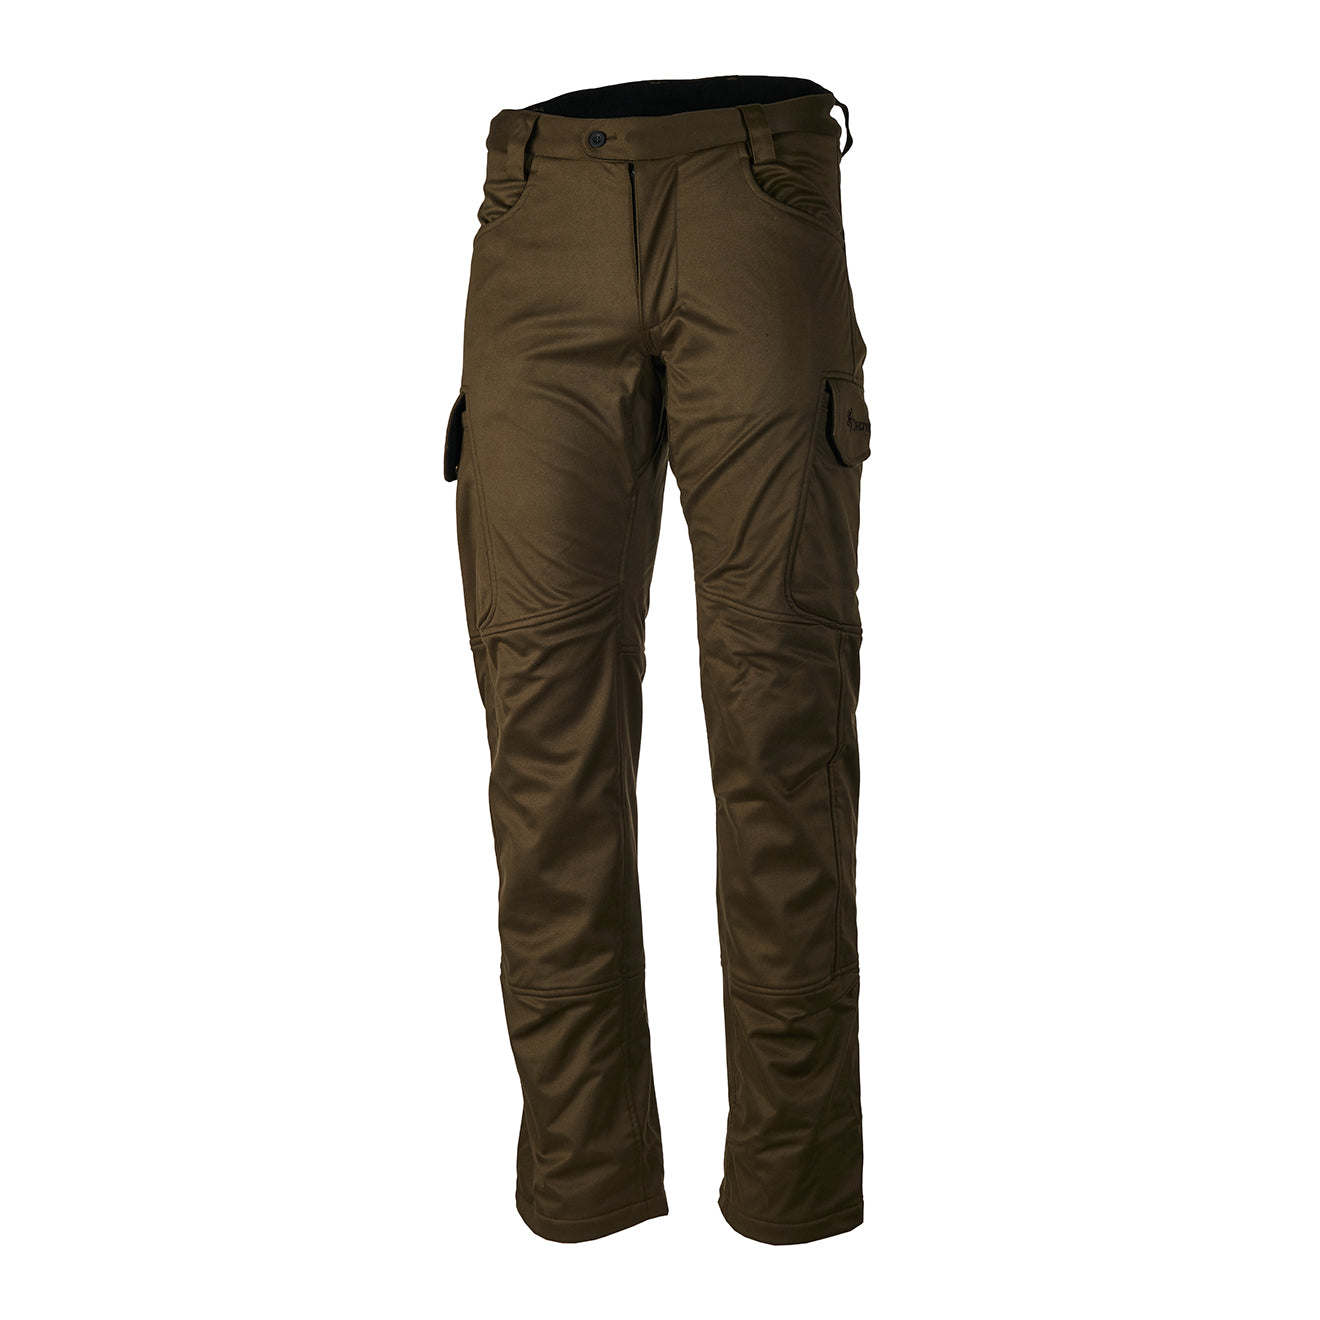 Browning Hells Canyon 2 Odorsmart Trouser Green | The Sporting Lodge